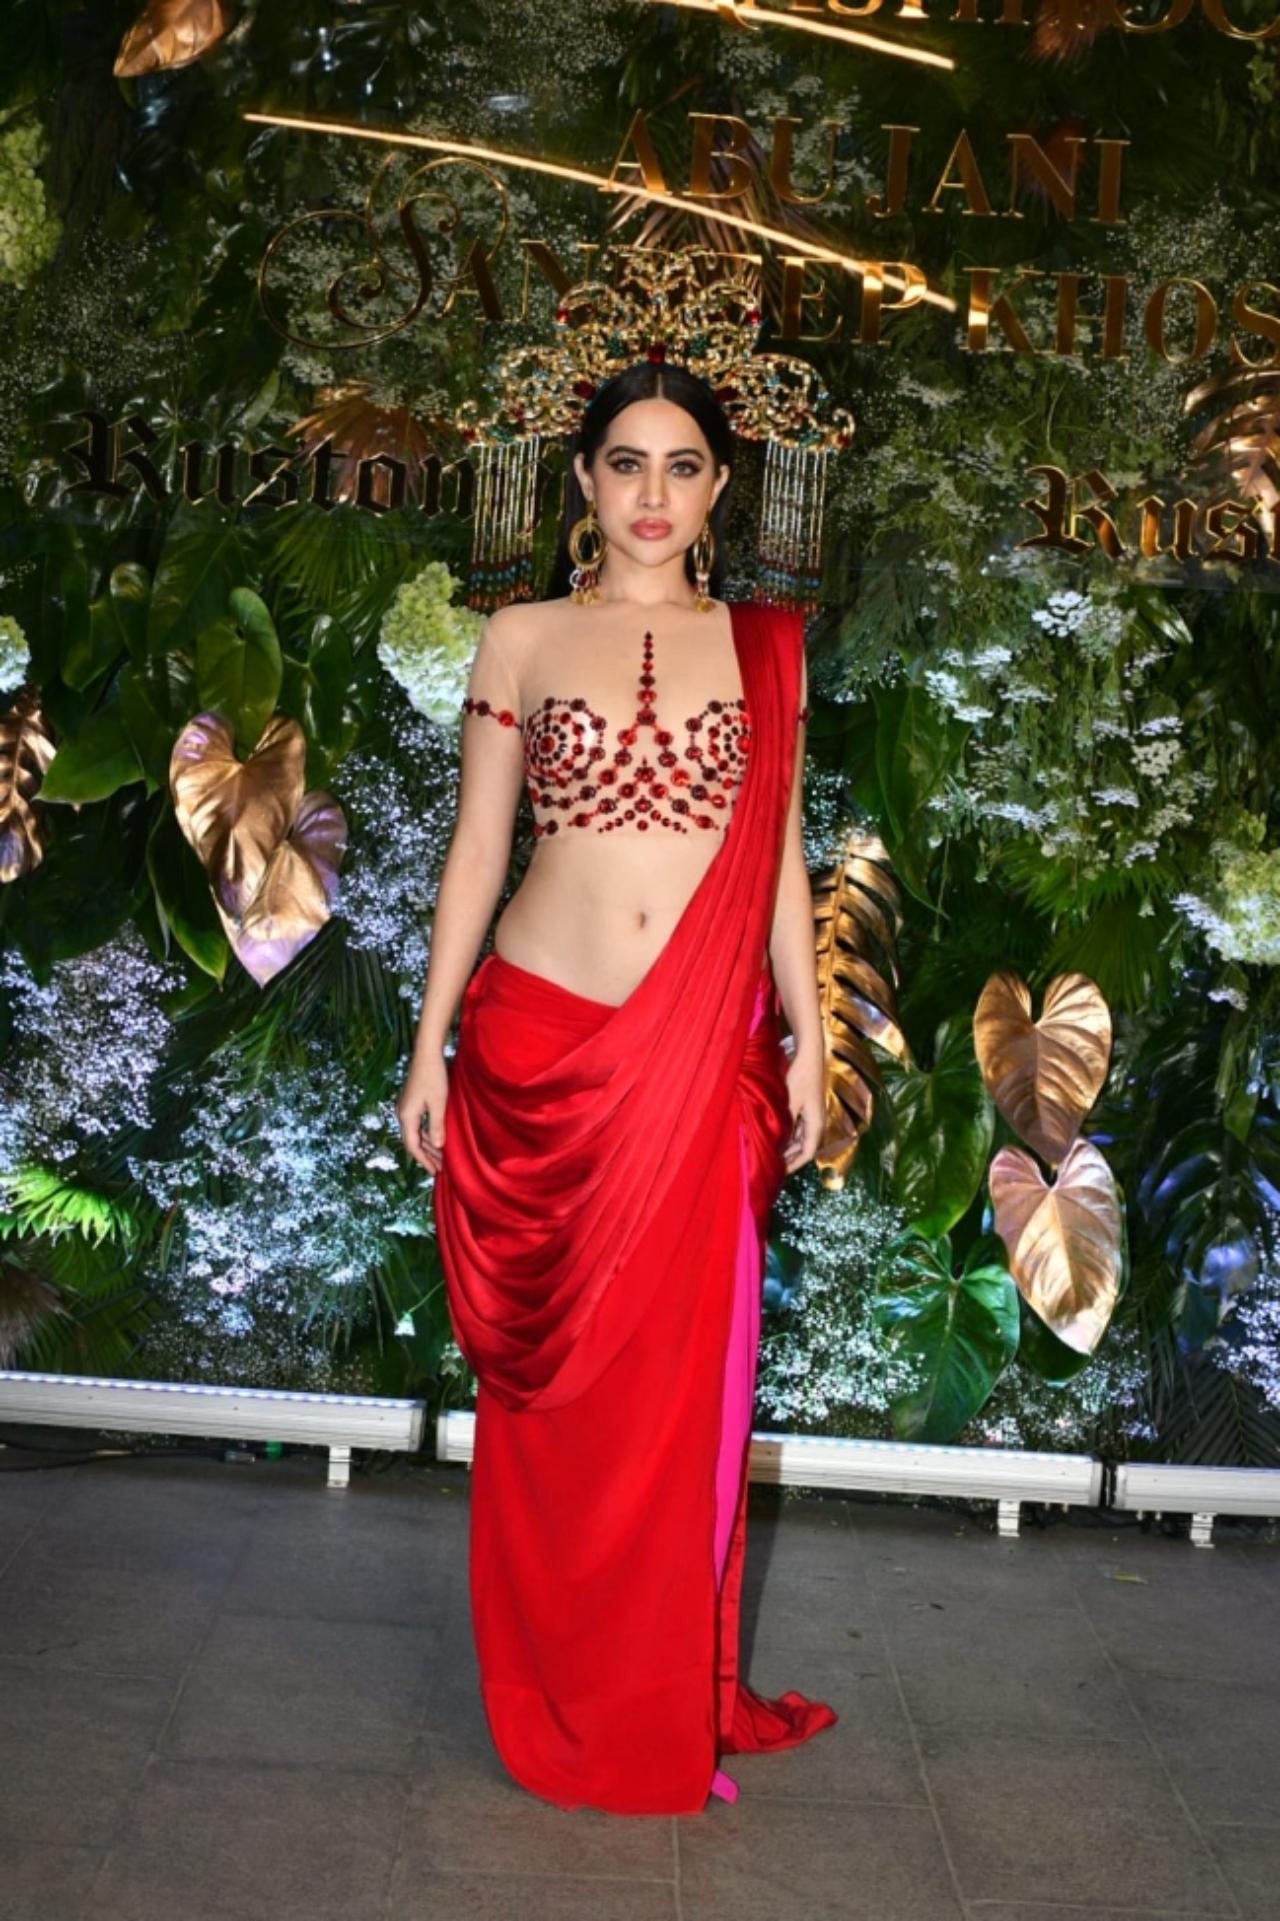 Social media star Uorfi Javed looked stunning in a bright red indo-western satin dress draped like a saree and a nude blouse with patterned red embellishments. The dress had a complimentary peak of hot pink on the side. Javed rounded off her look with a gorgeous 'Goddess' like head gear